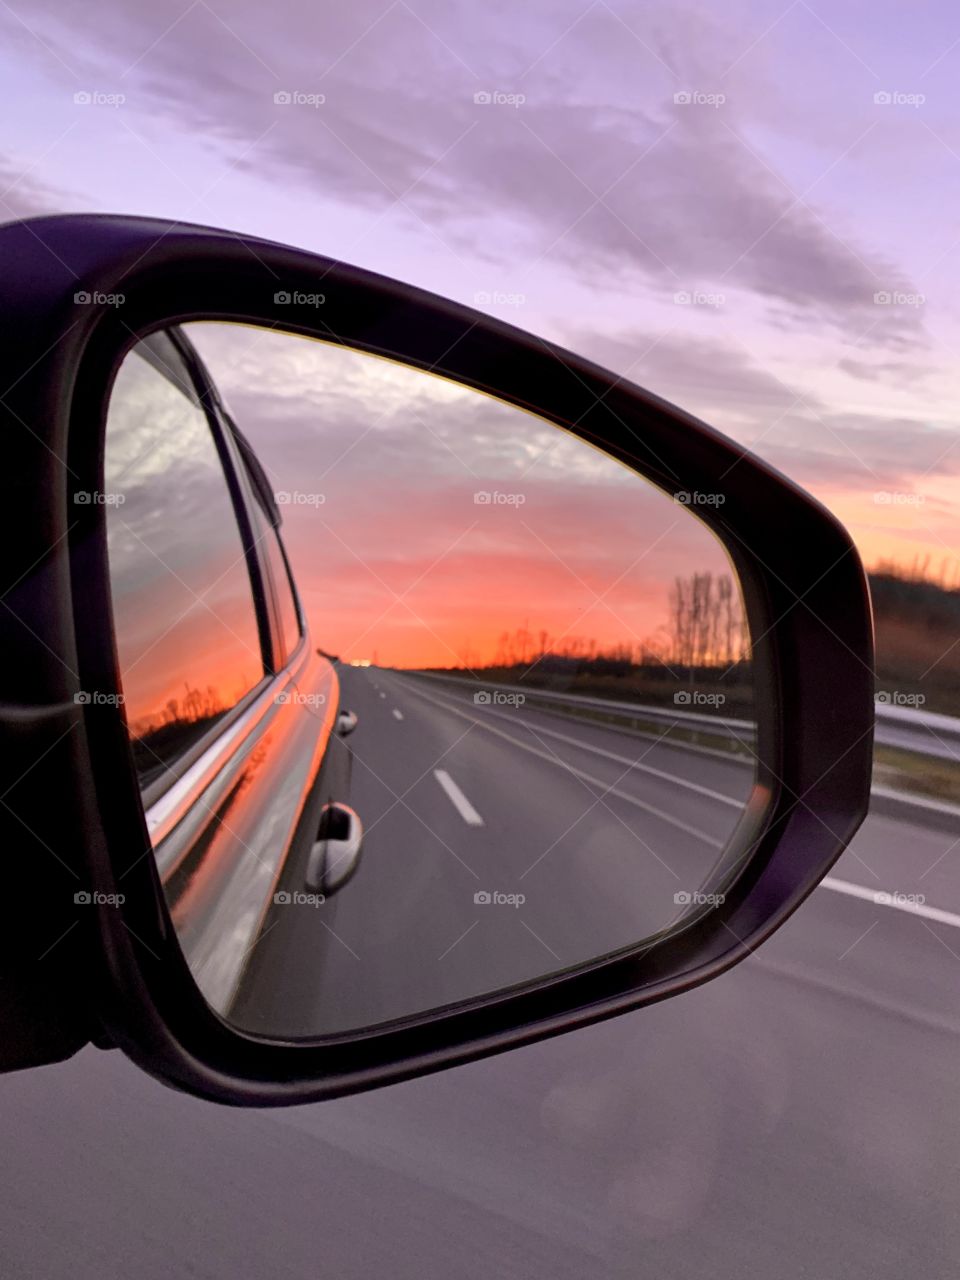 Autumn ... evening ... track ... sunset ... A fiery red sunset is reflected in the car mirror